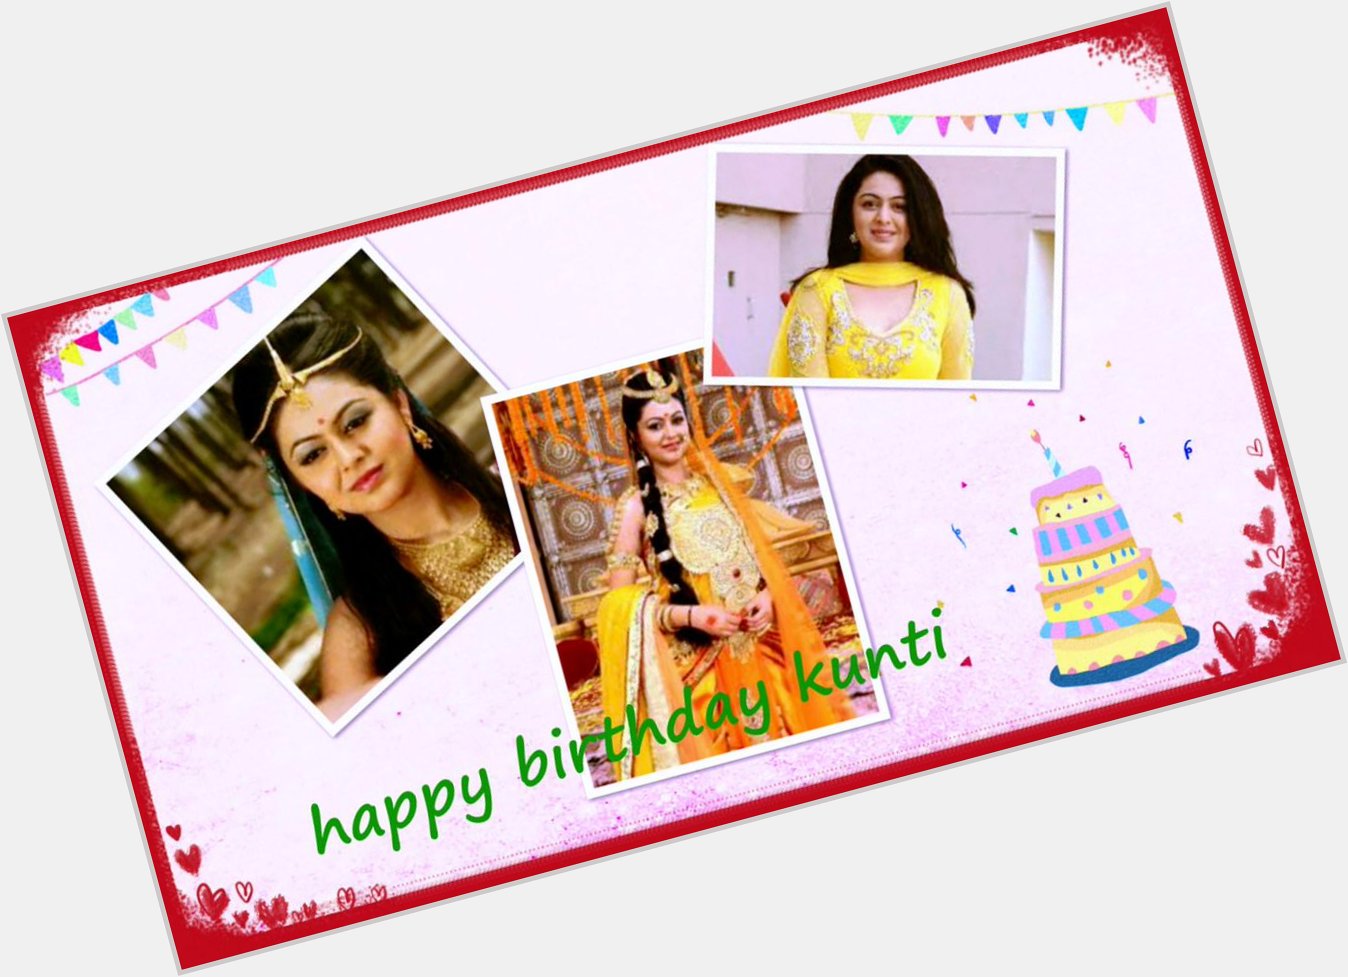 \" happy birthday shafaq naaz wish you all the best
and hopefully be able to come back to Indonesia!!! 